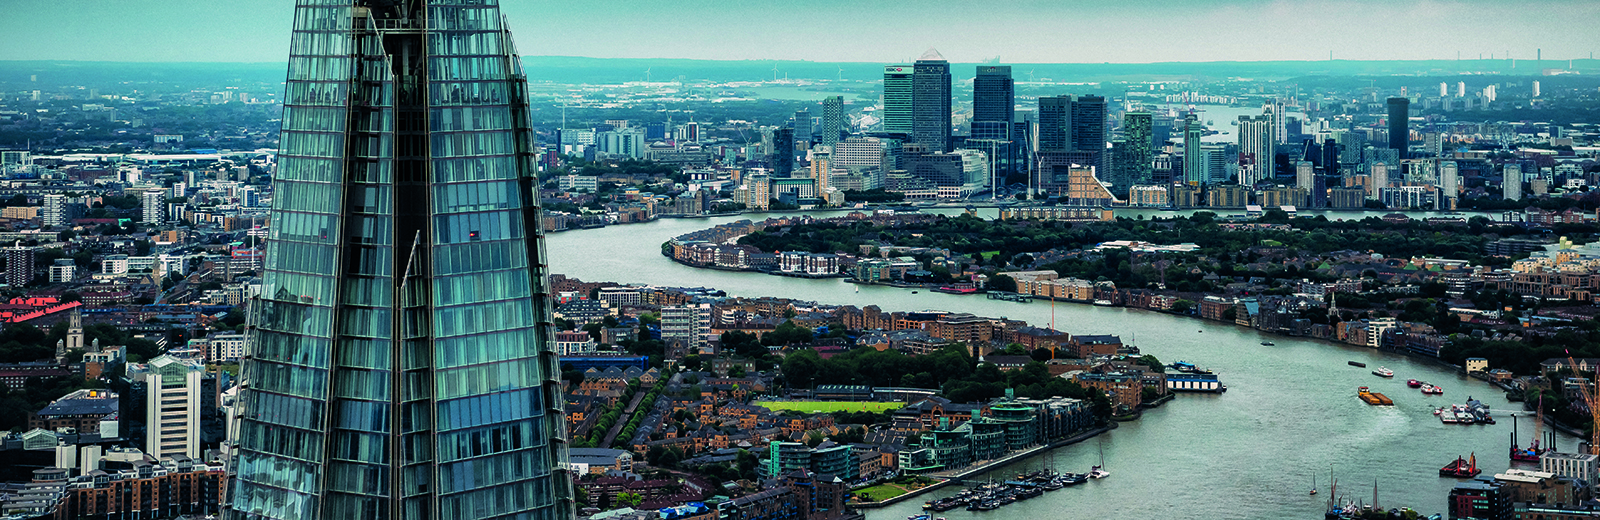 Arial view of the Shard and River Thames in London